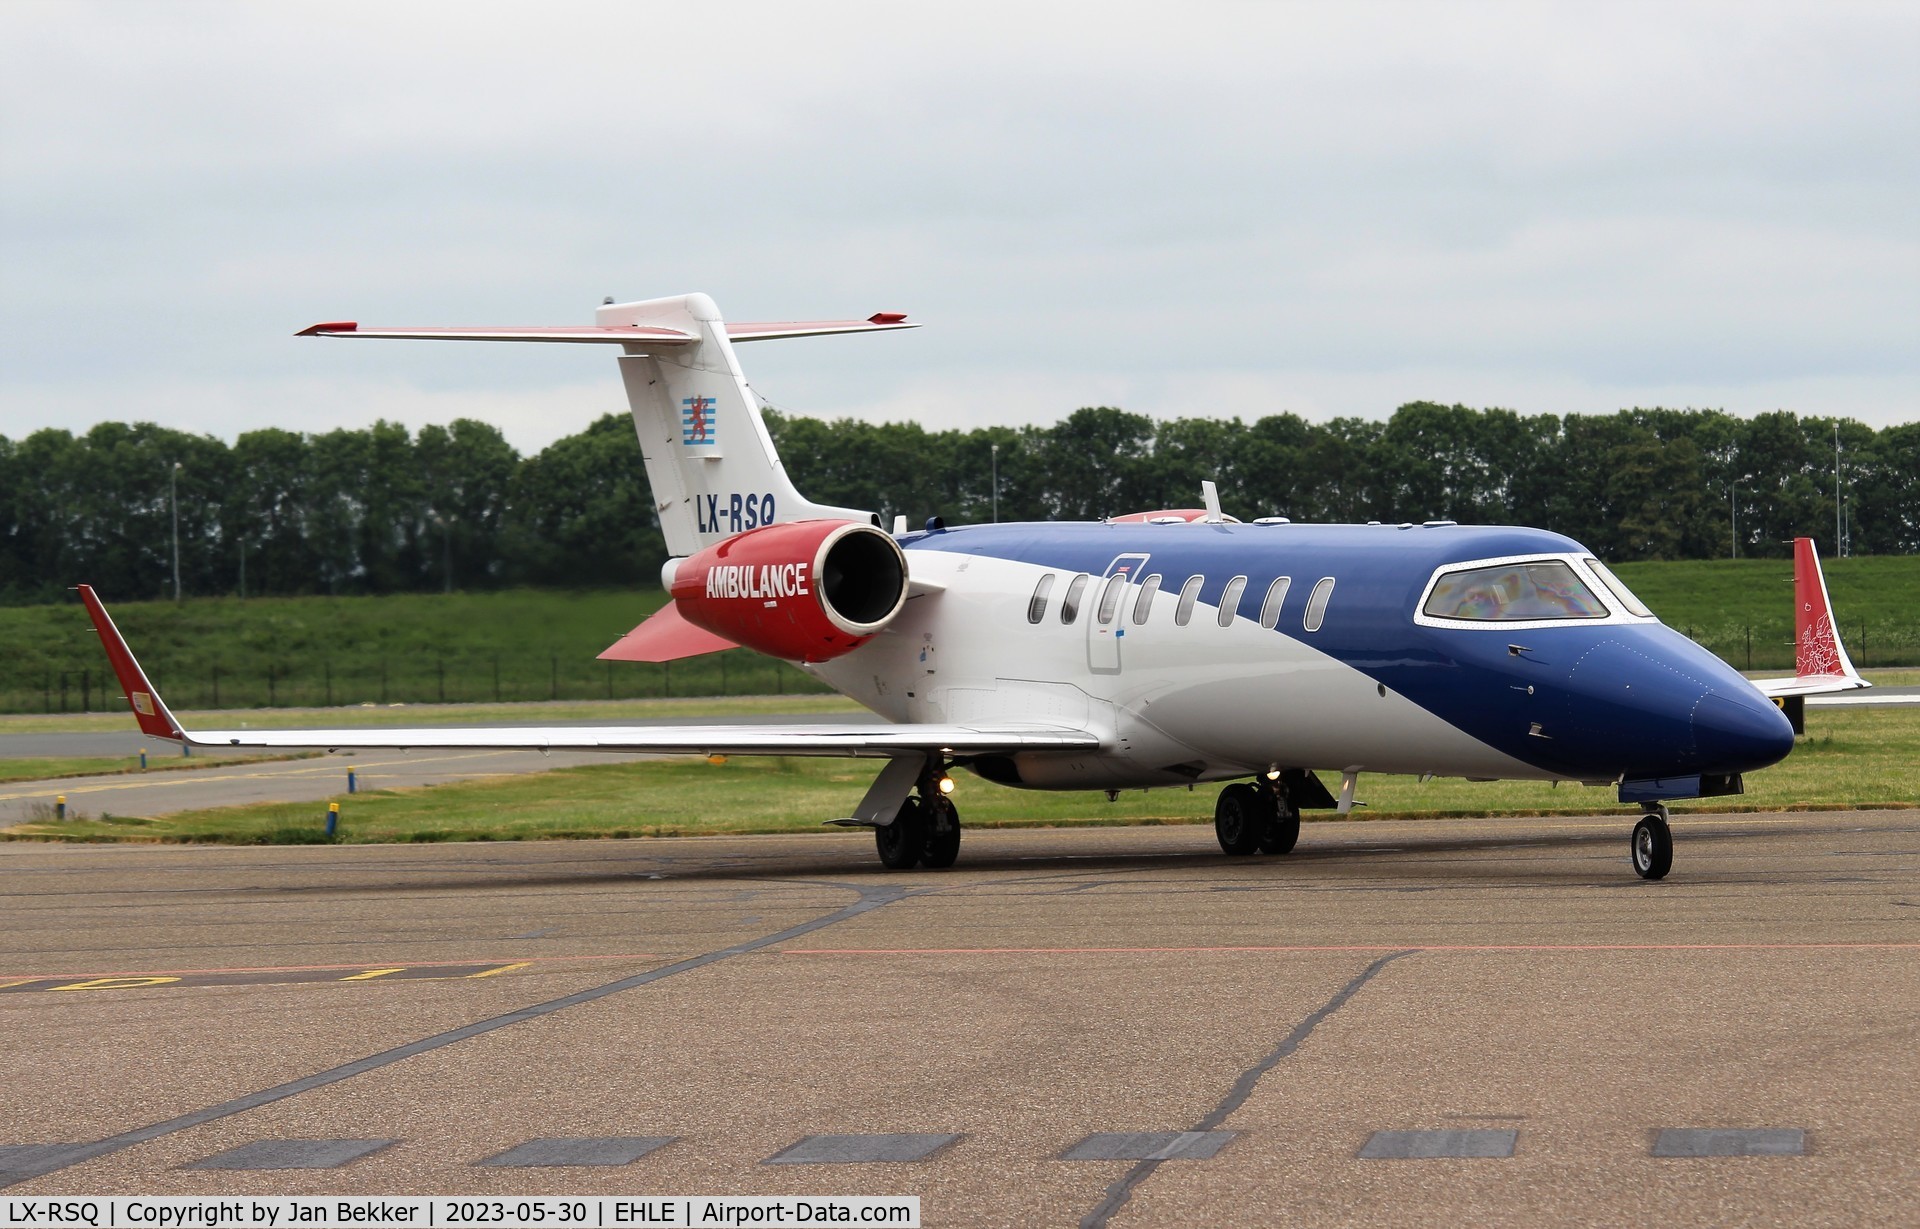 LX-RSQ, 2009 Learjet 45 C/N 398, Arriving with patient at Lelystad Airport